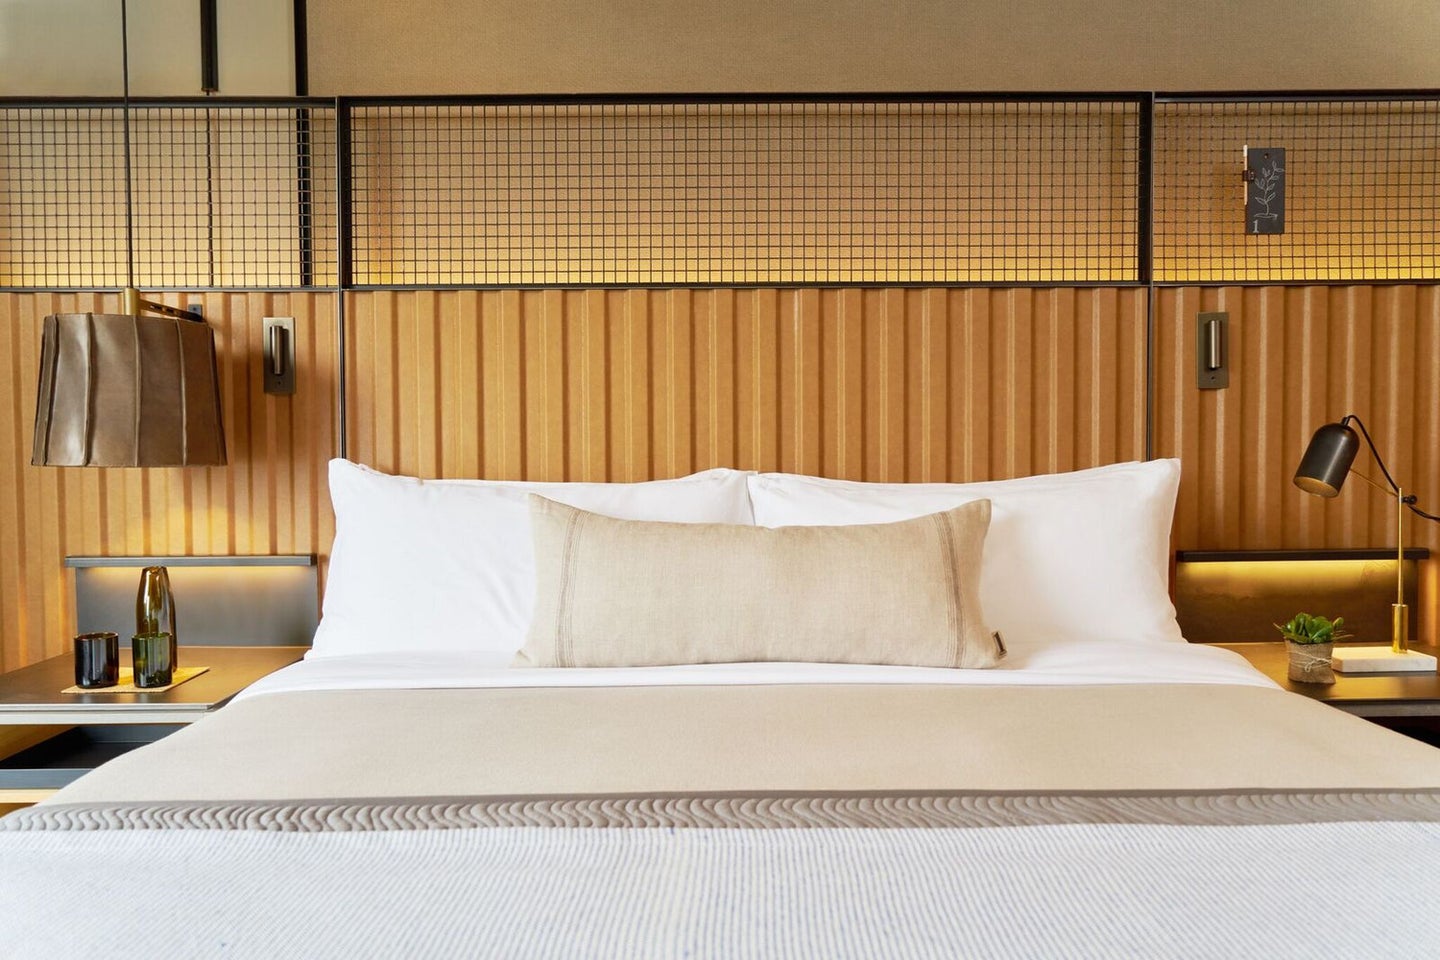 Hotel Hacks: How to Get your Best Night's Sleep in a Hotel Room